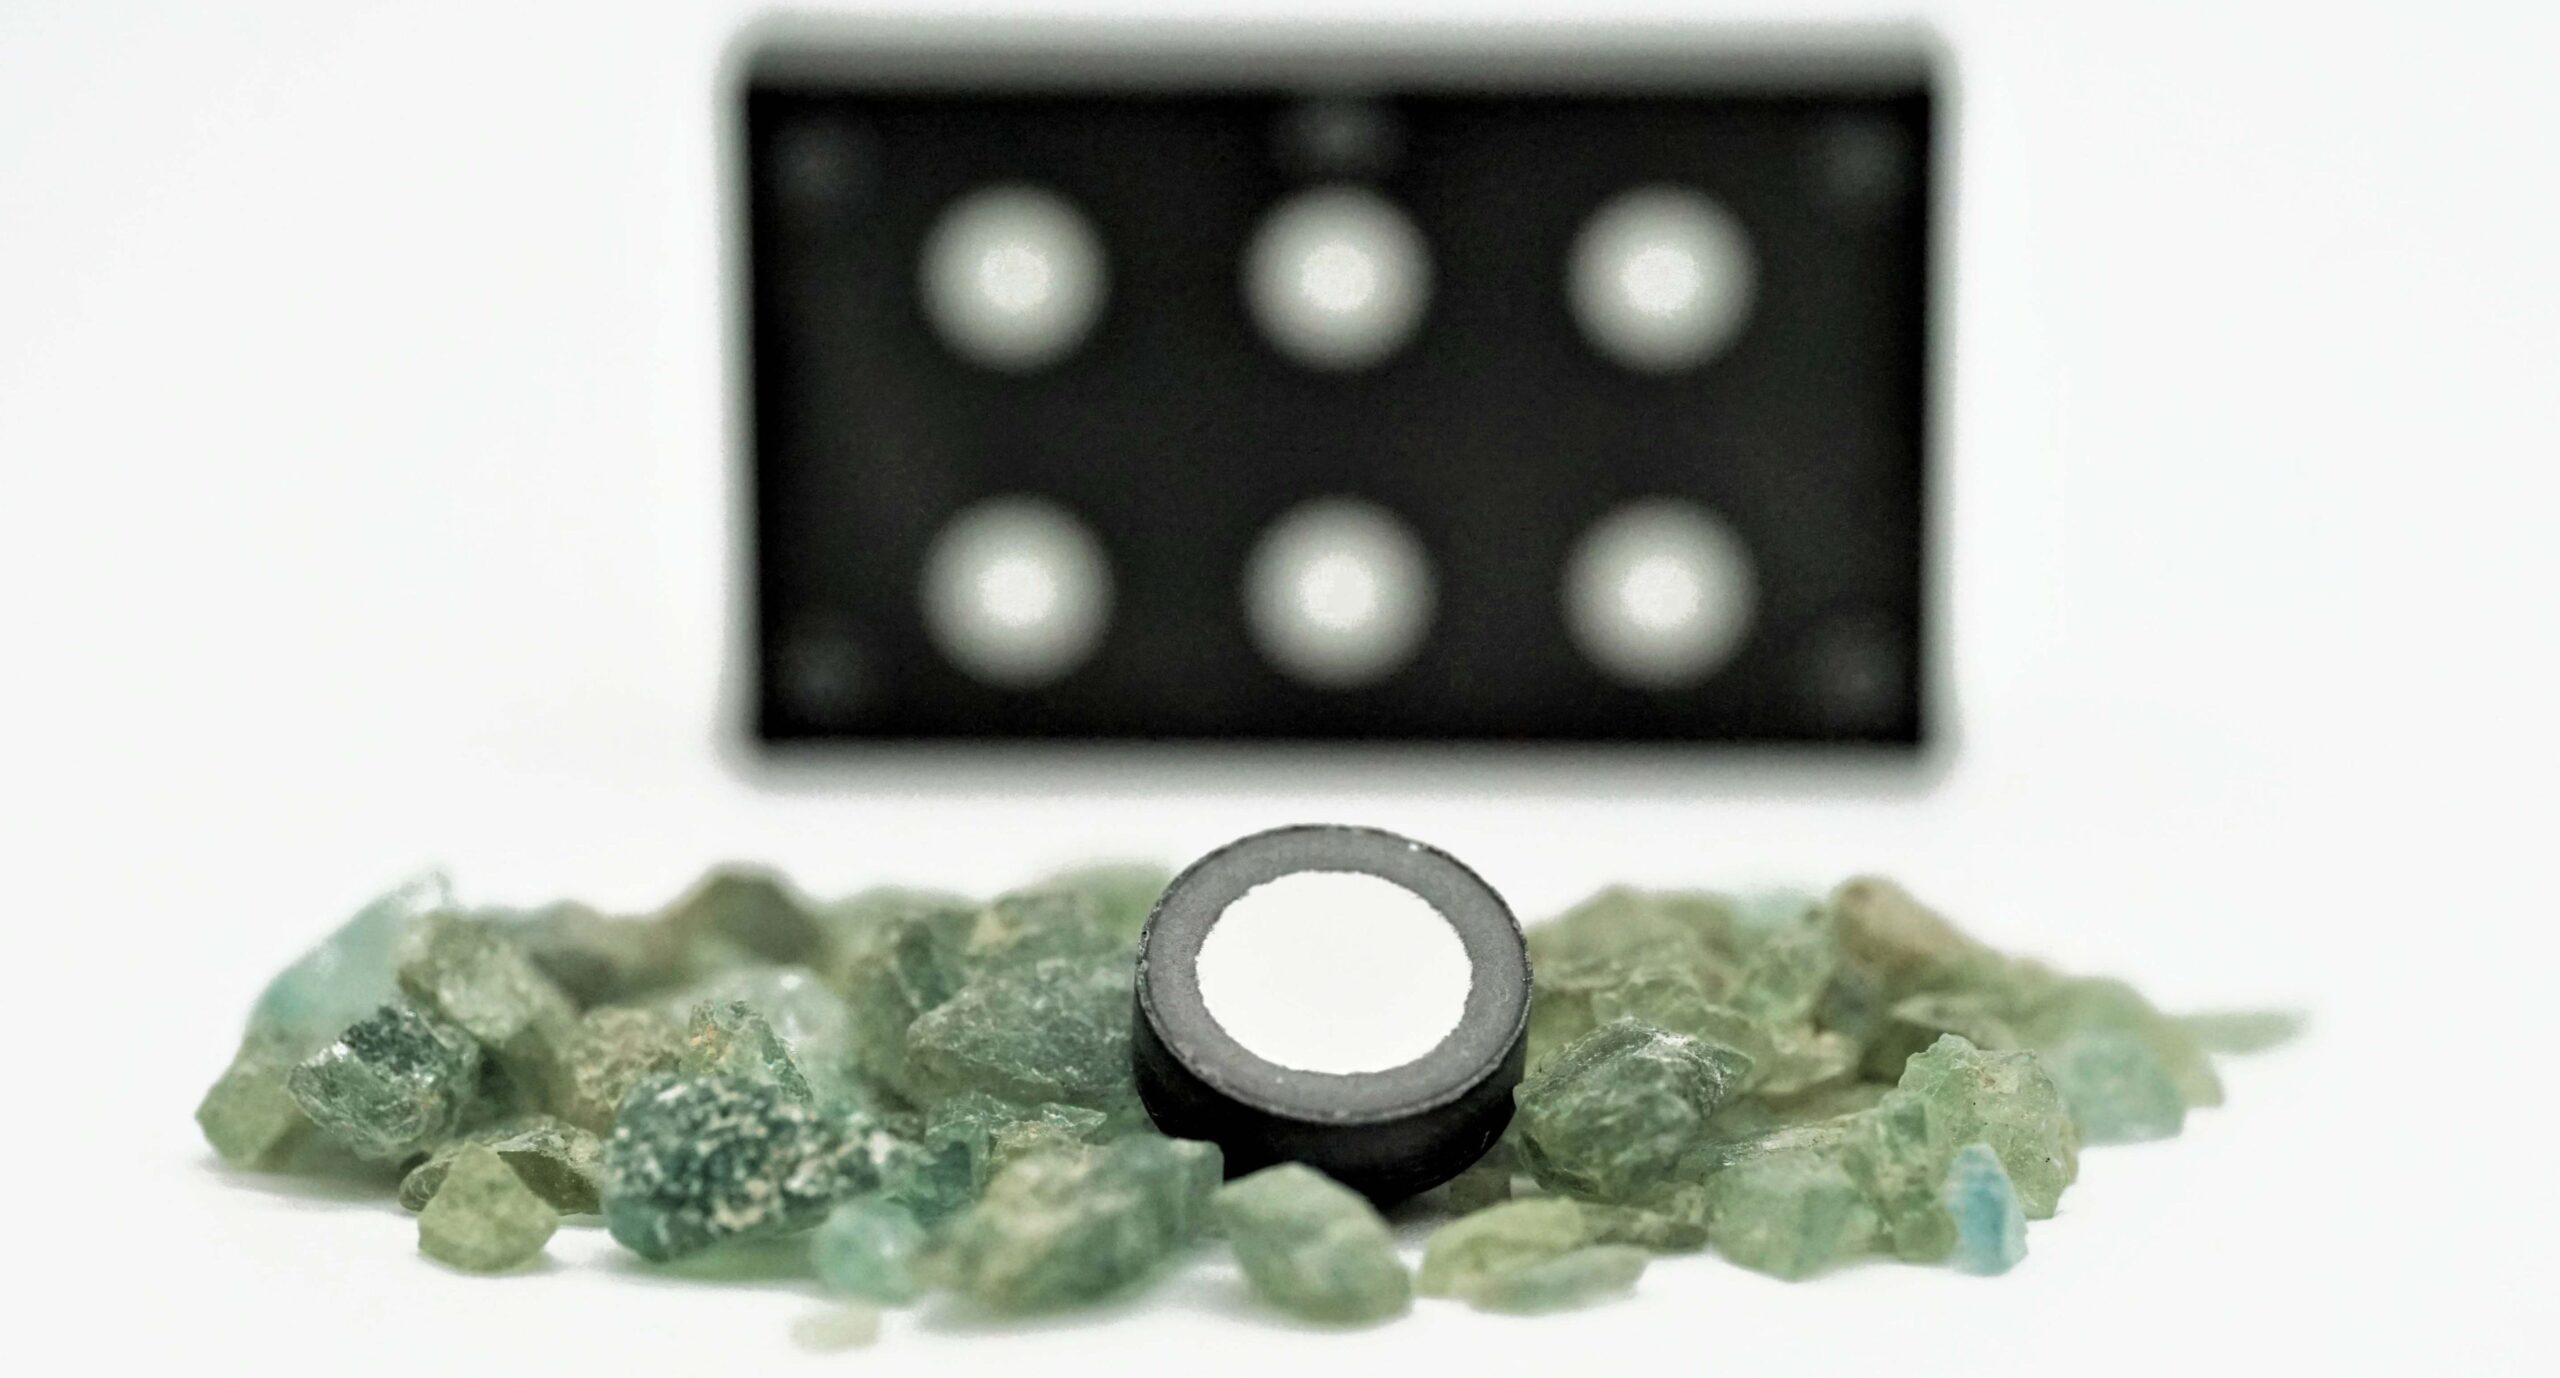 Apatite Nano-Pellets – our first microanalytical certified reference material